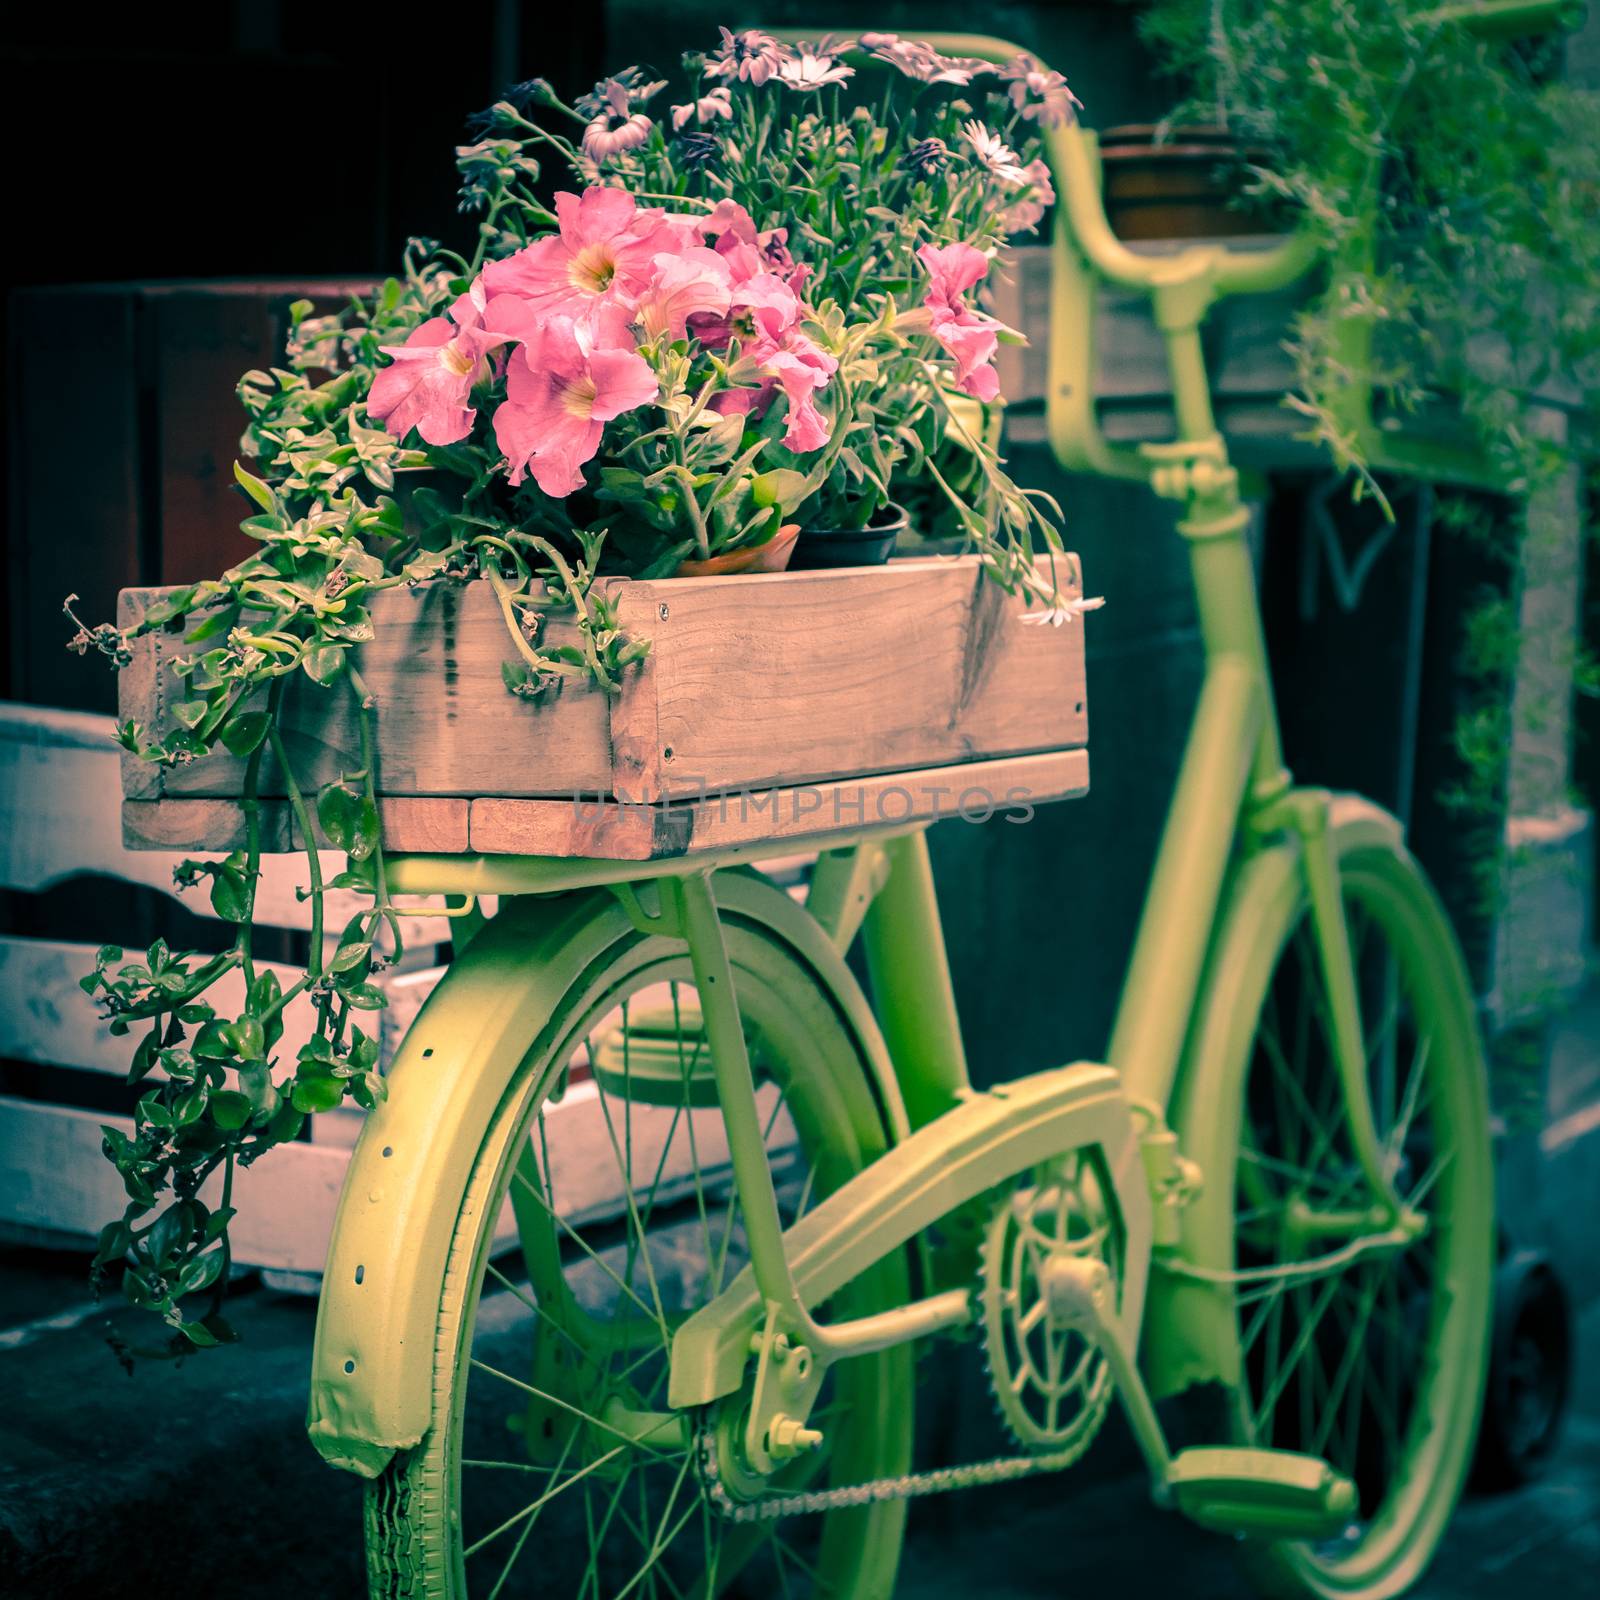 Old bicycle converted into a flower pot by mikelju